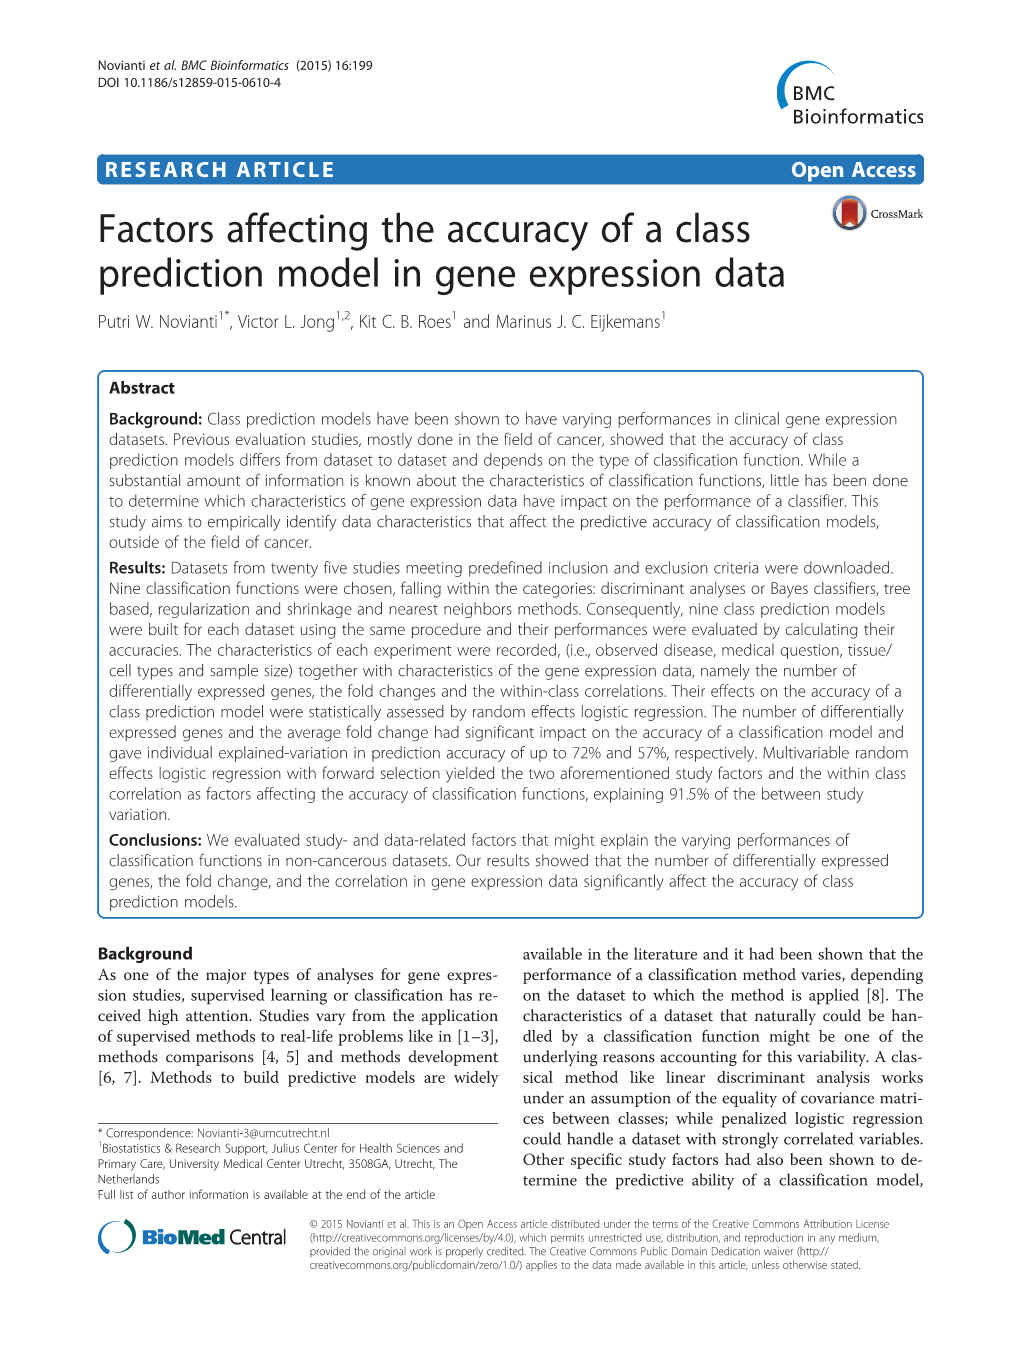 Factors Affecting the Accuracy of a Class Prediction Model in Gene Expression Data Putri W